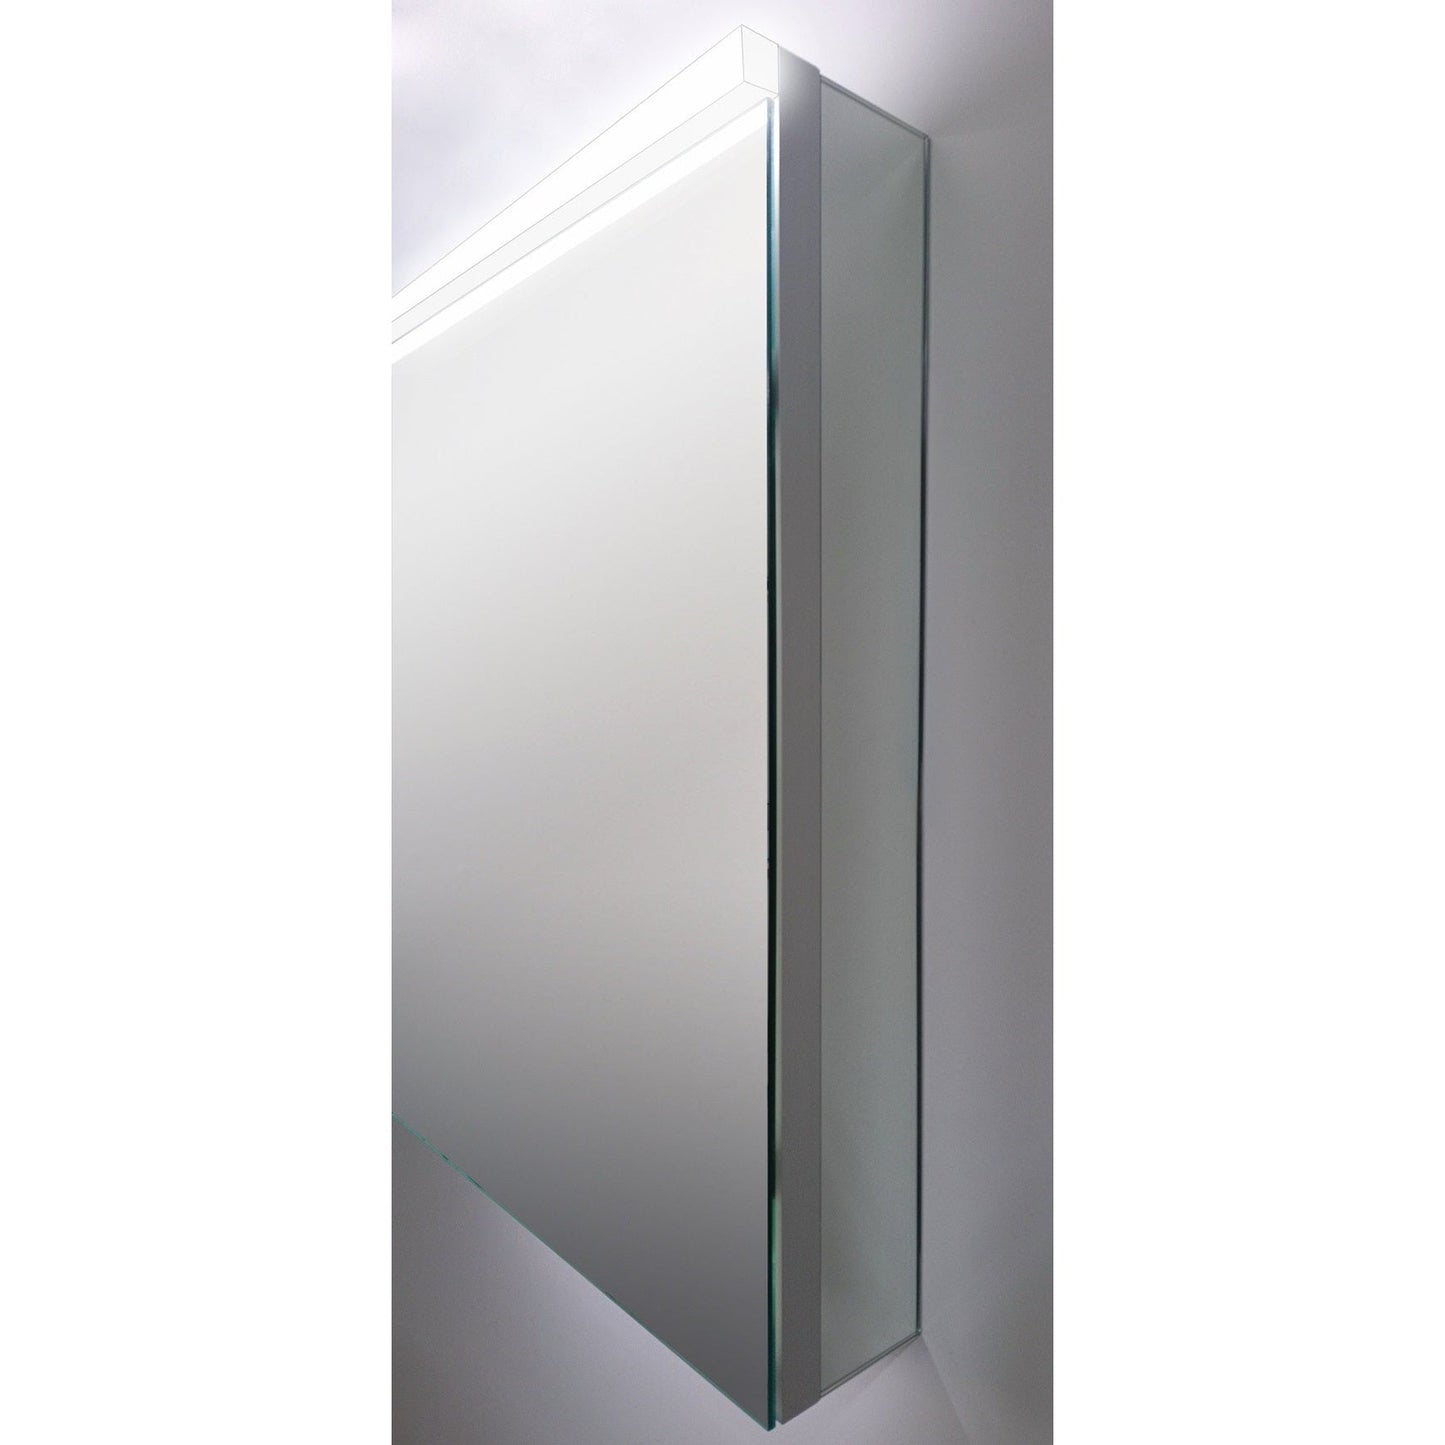 Sidler Xamo 24" x 30" 4000K Single Mirror Right Hinged Door Medicine Cabinet With Built-in GFCI outlet and Night Light Function